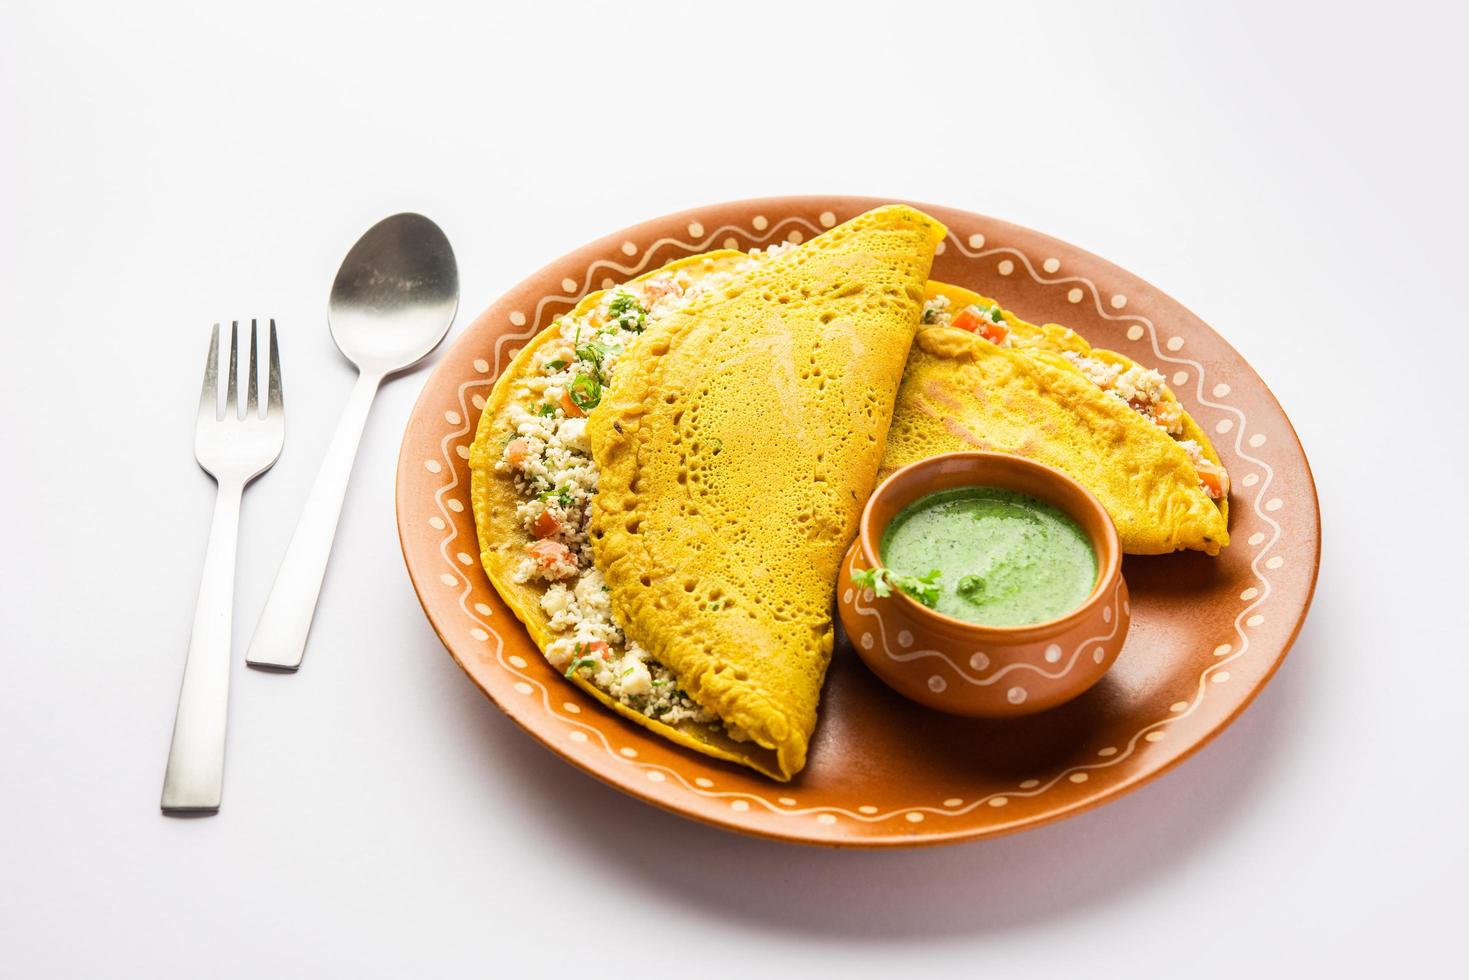 Paneer stuffed Besan chilla or Cheela made using chickpea flour with cottage cheese stuffing photo